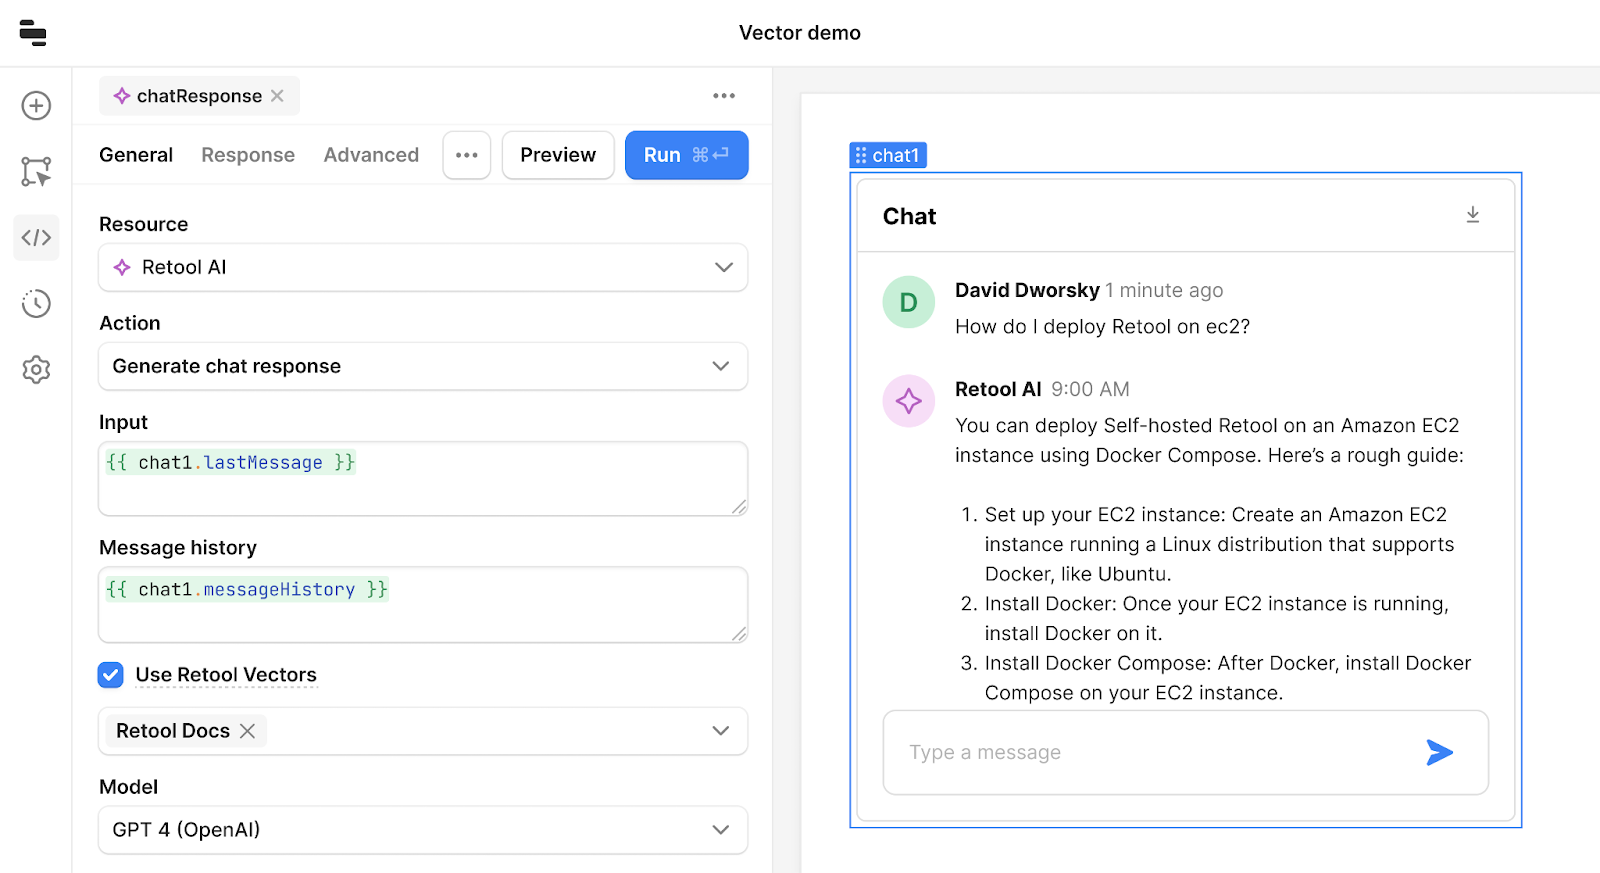  The Retool user build a chatbot that’s able to answer a specific question about how to deploy Retool on an ec2 instance.